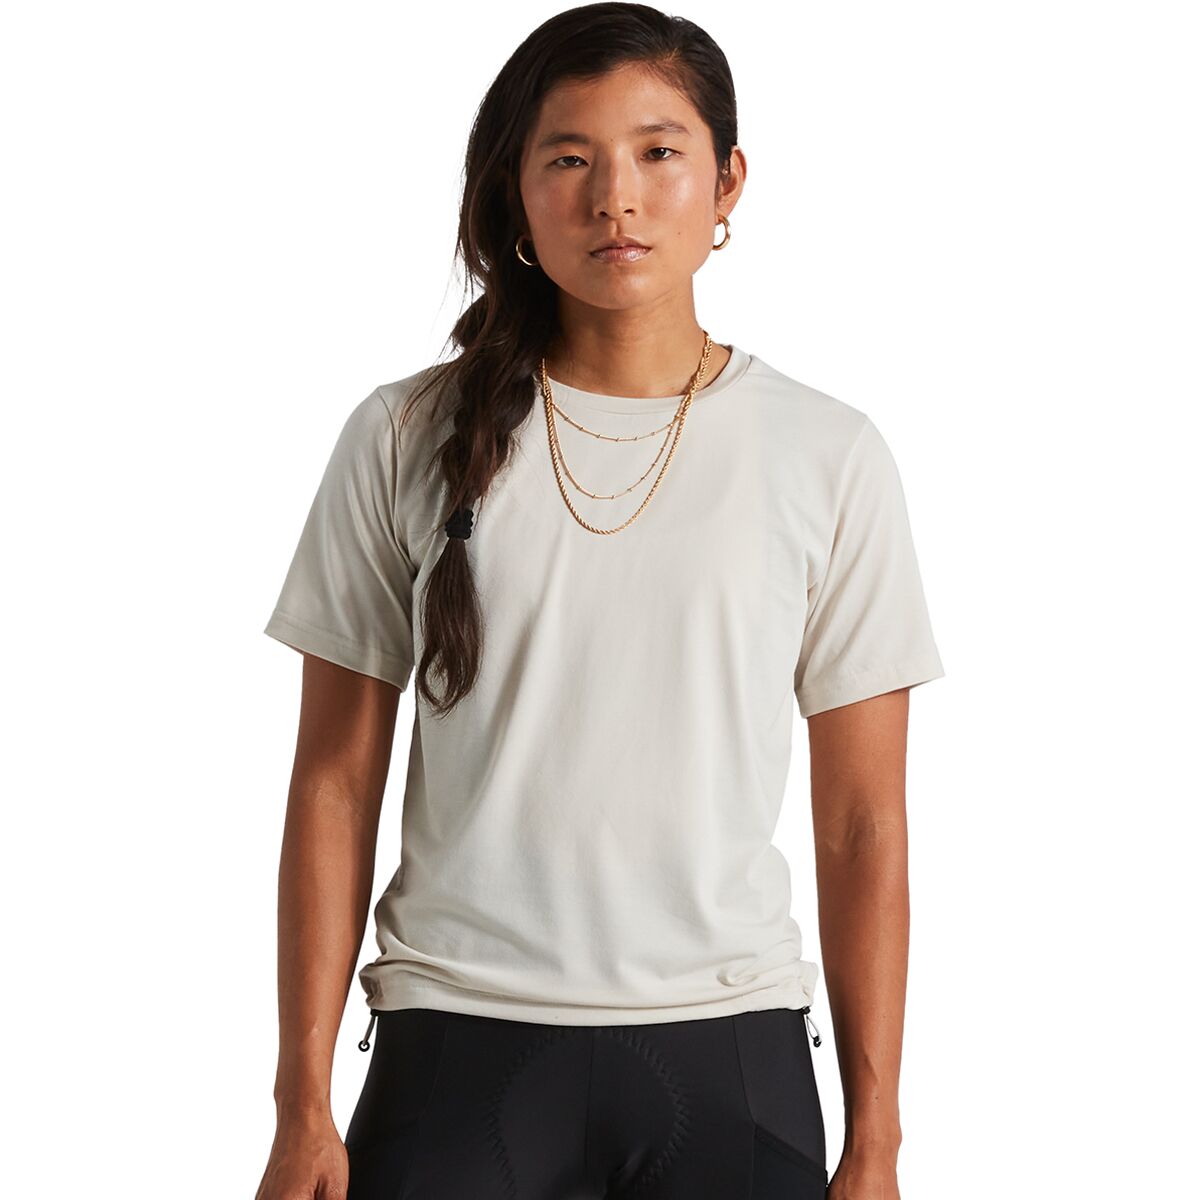 Specialized Adv Air Short-Sleeve Jersey - Women's